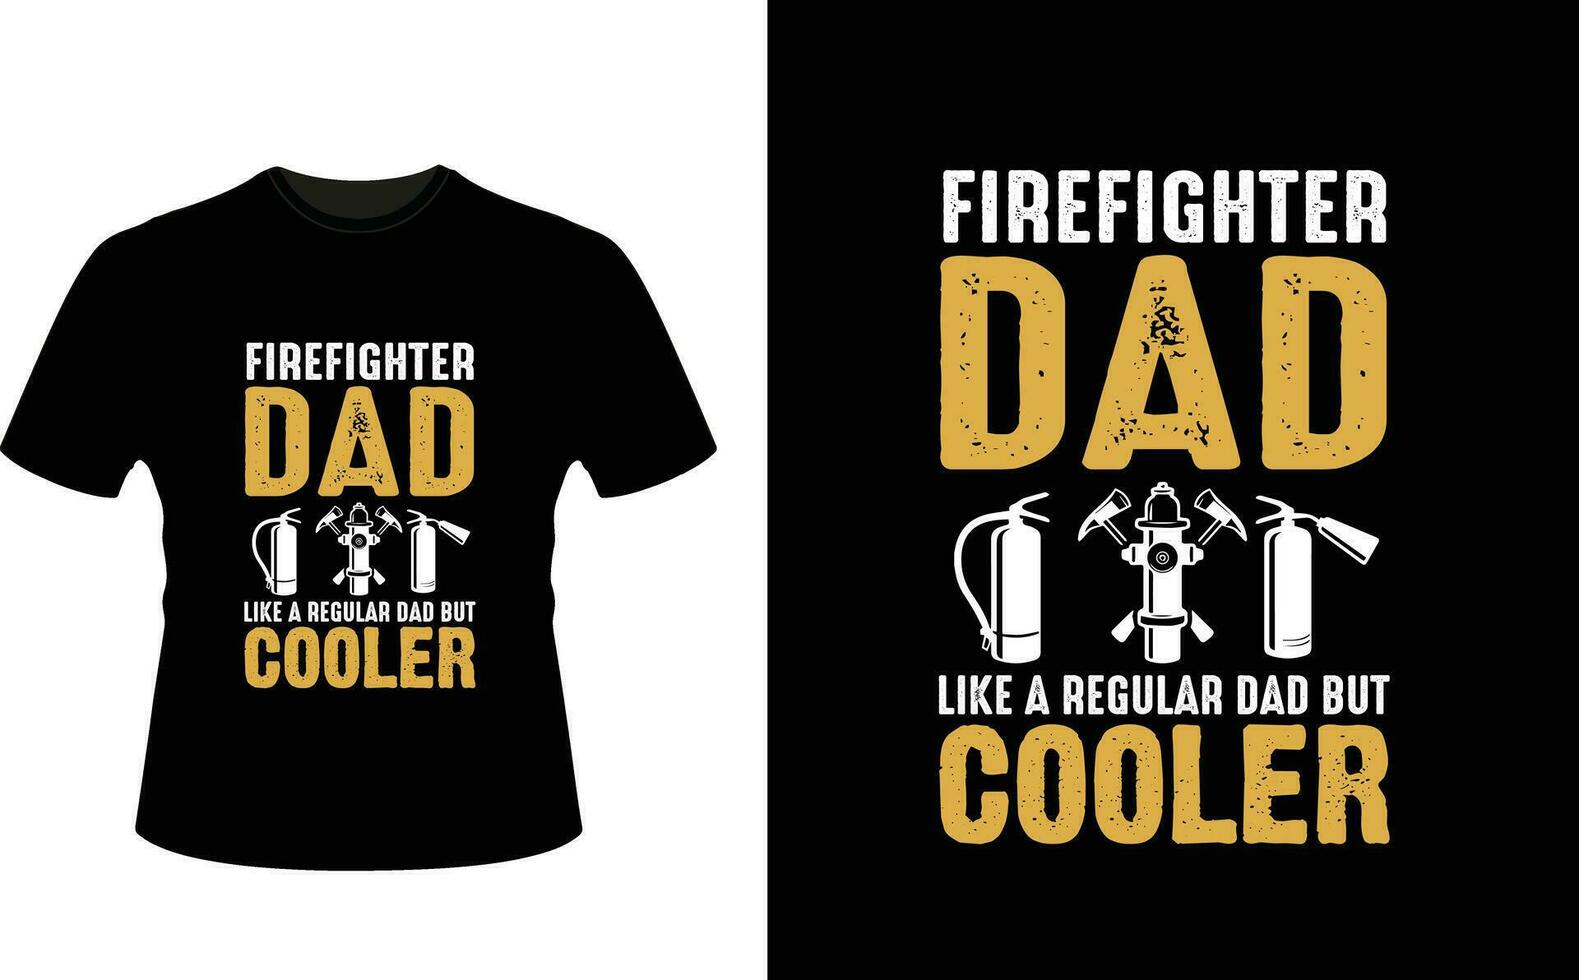 Firefighter Dad Like a Regular Dad But Cooler or dad papa tshirt design or Father day t shirt Design vector